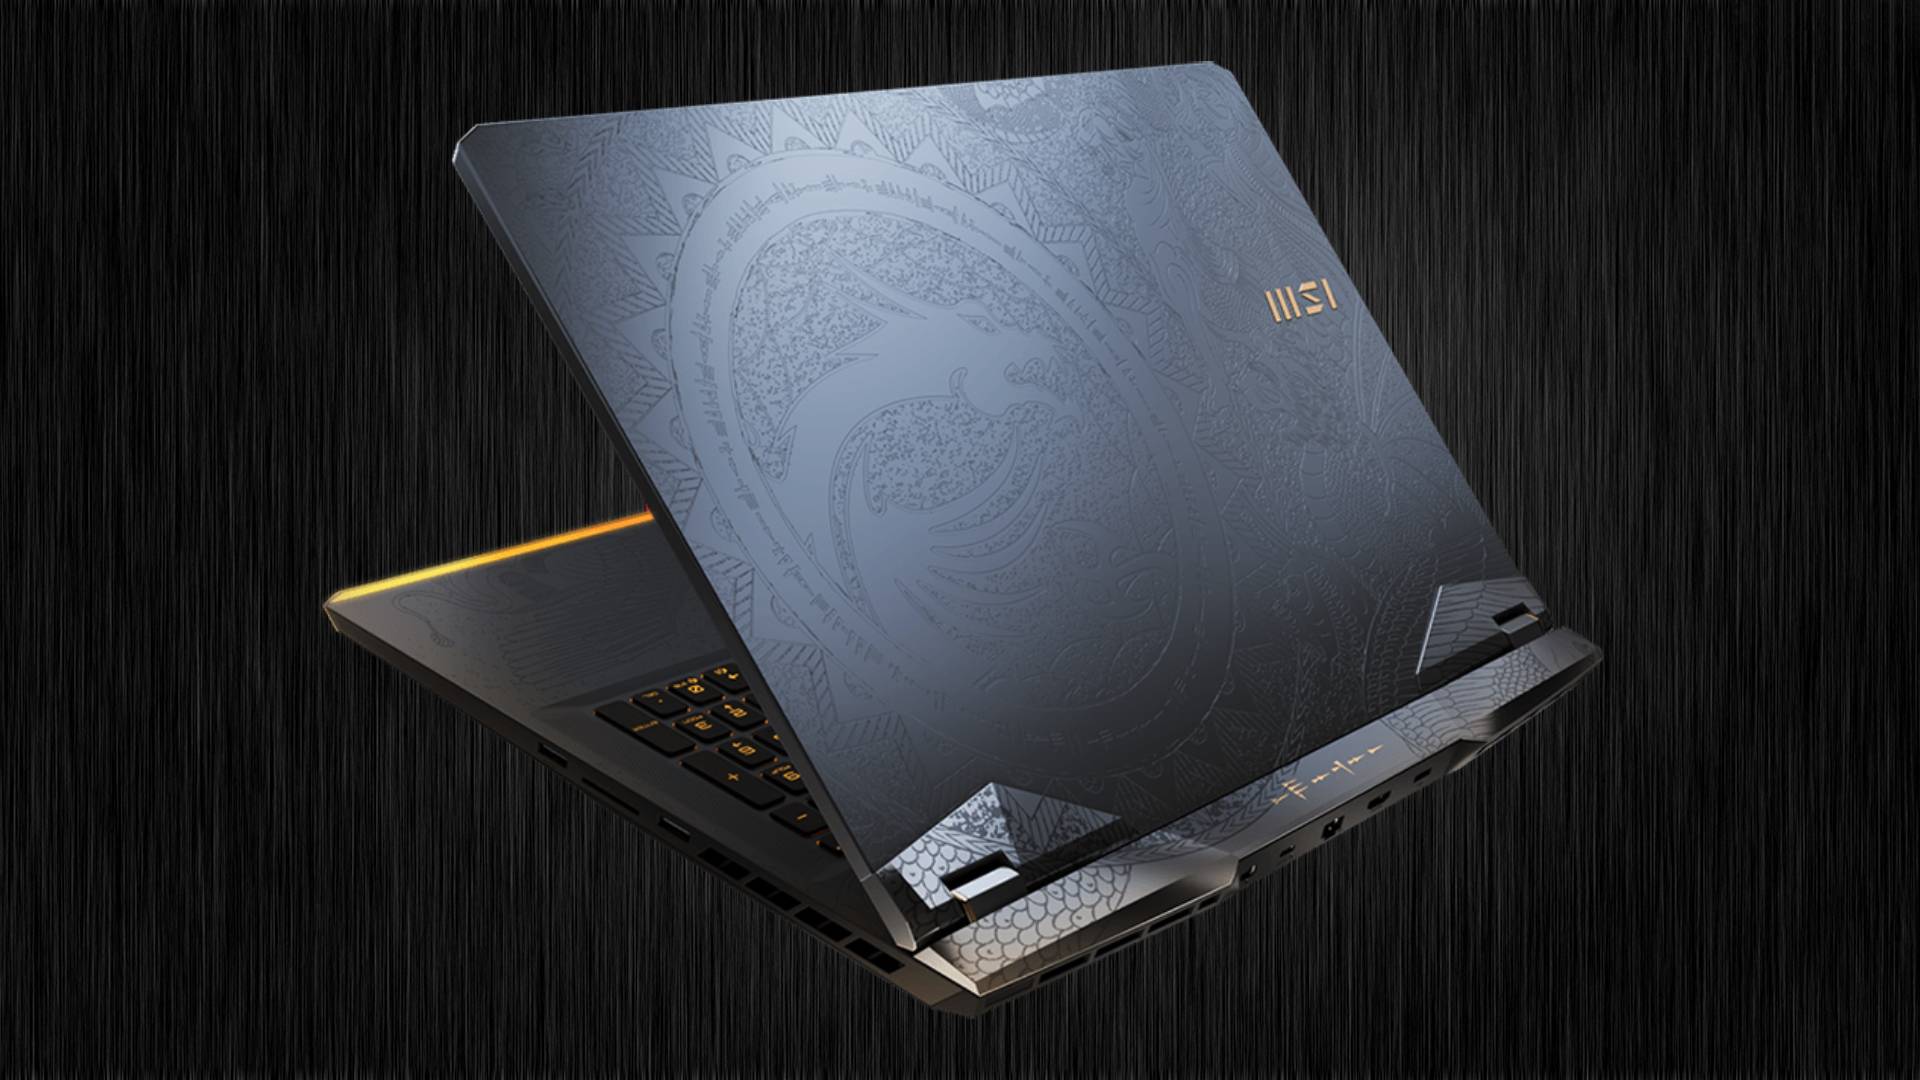 MSI’s Nvidia RTX 3070 Ti and RTX 3080 Ti gaming laptop lineup has leaked online